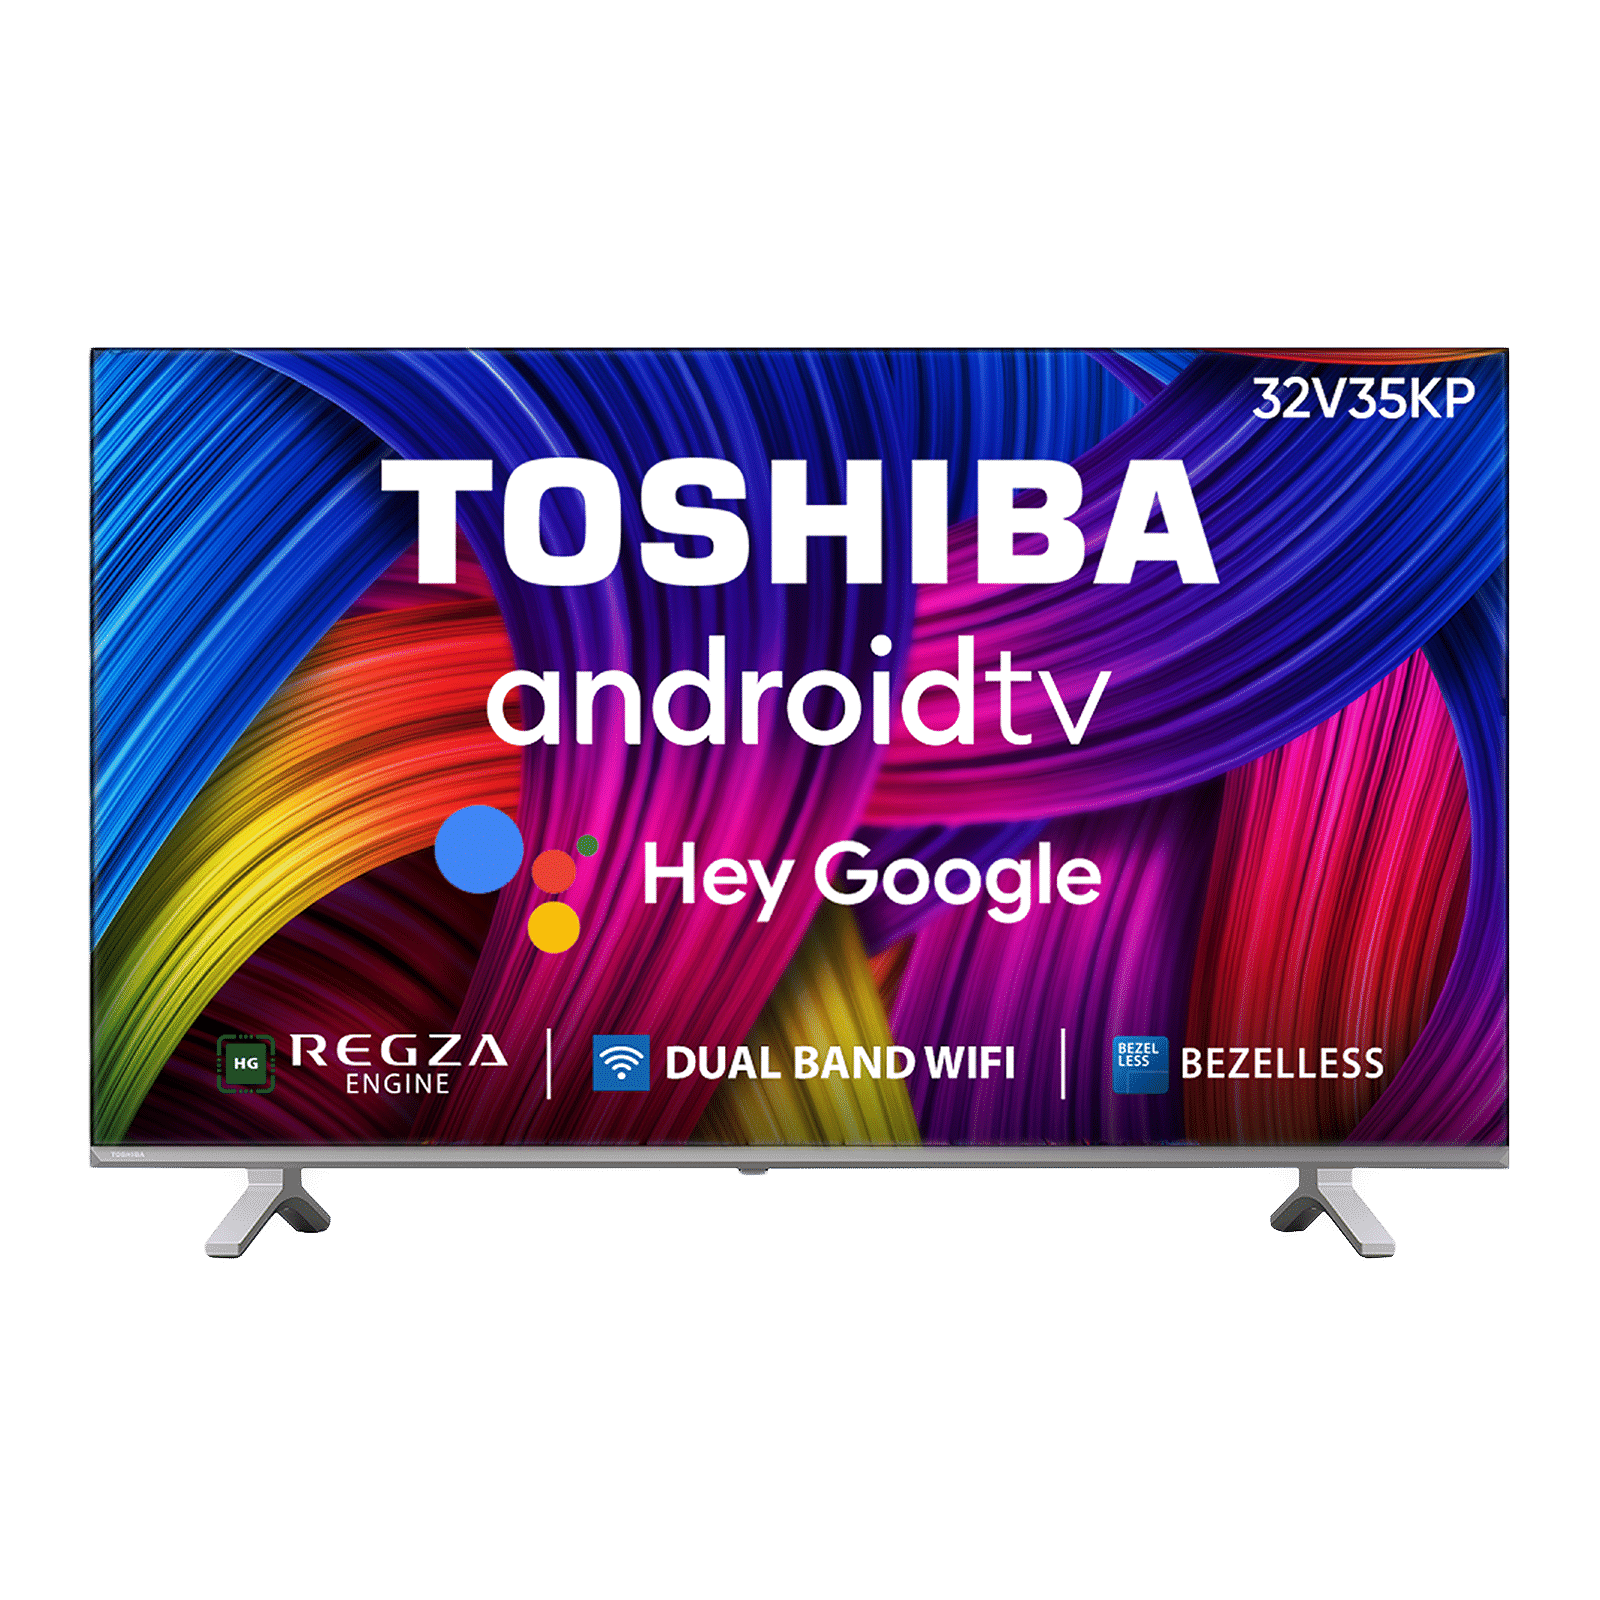 Buy TOSHIBA V35KP 80 cm (32 inch) HD Ready LED Smart Android TV with Google Assistant Online - Croma